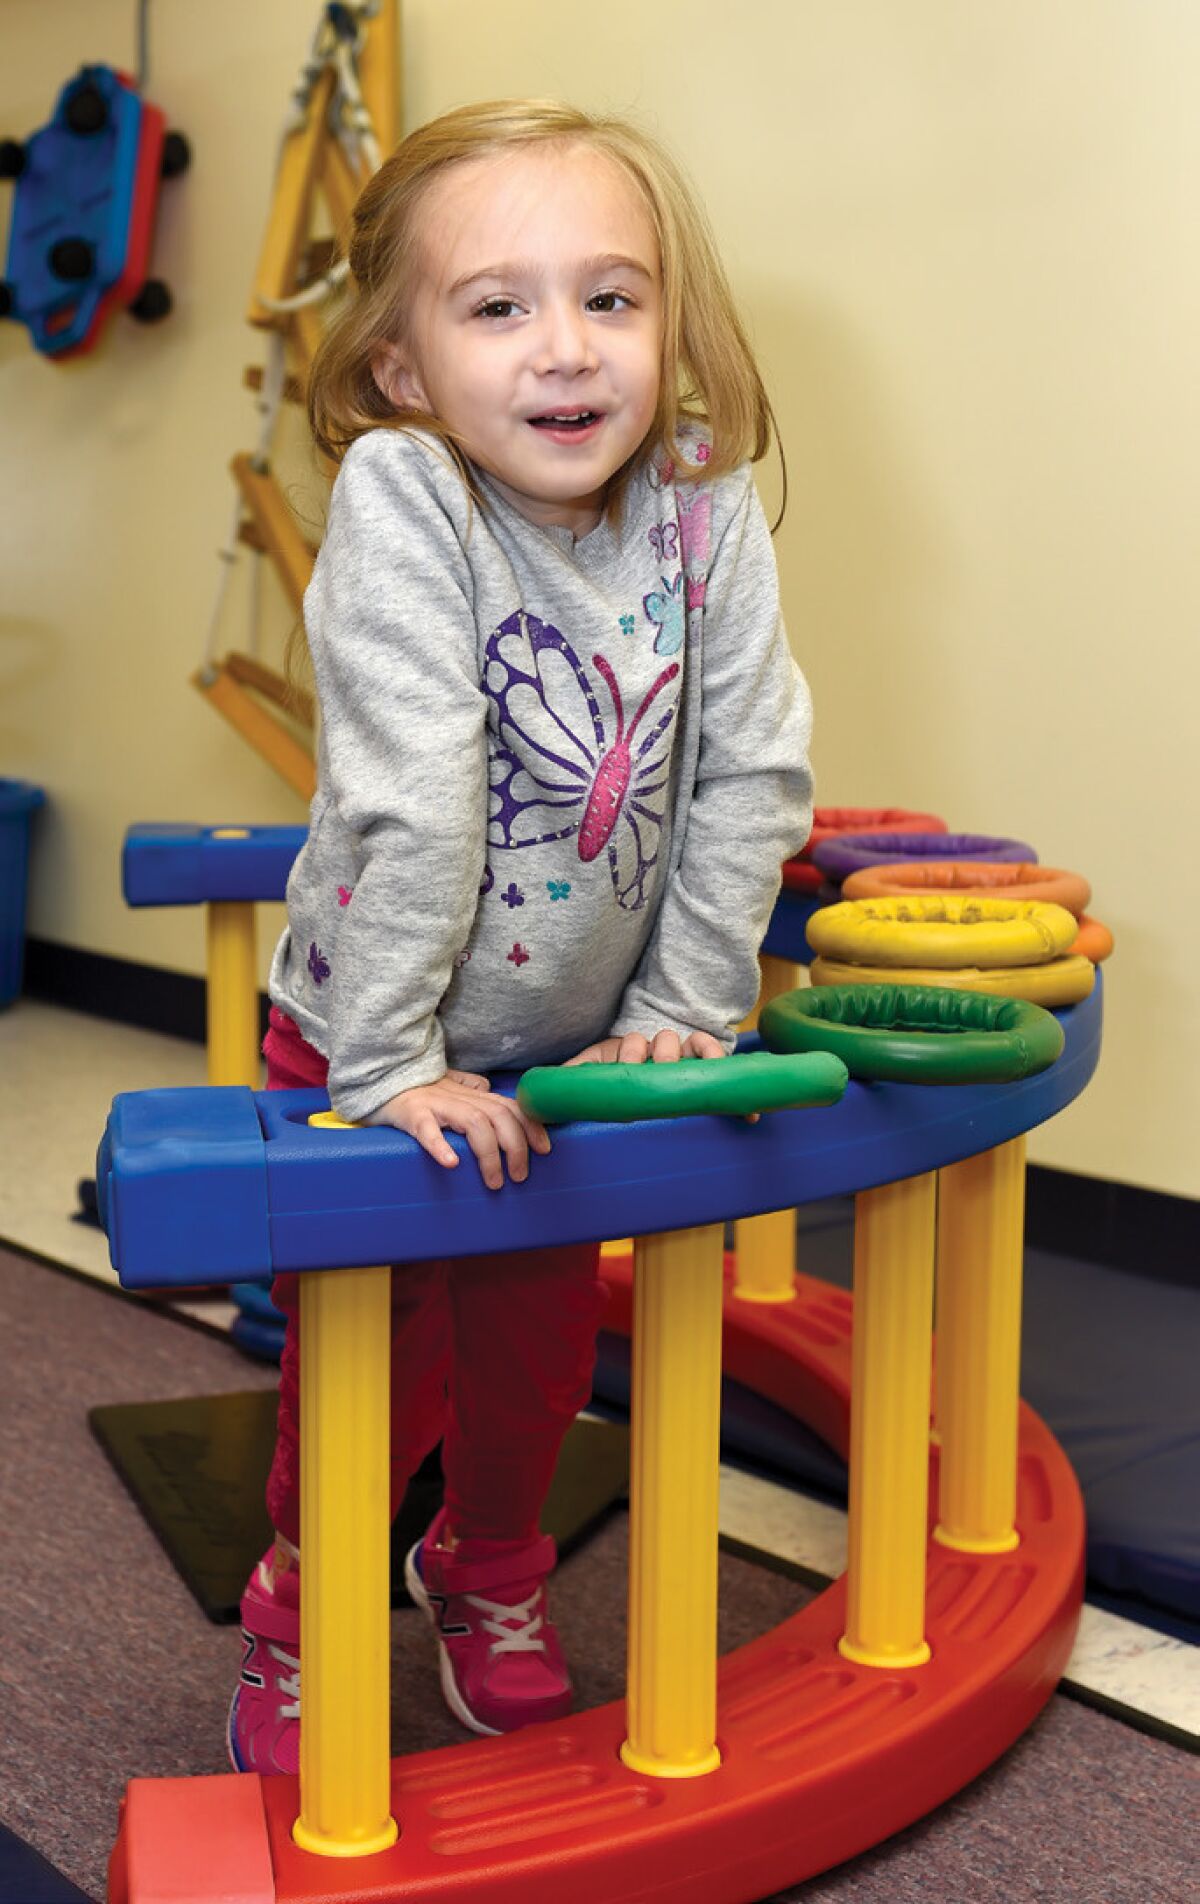 Emma Larson, 3 1/2 years old, is now able to walk on crutches thanks to the drug Spinraza. (Kathy Kmonicek, 2016/CSHL)